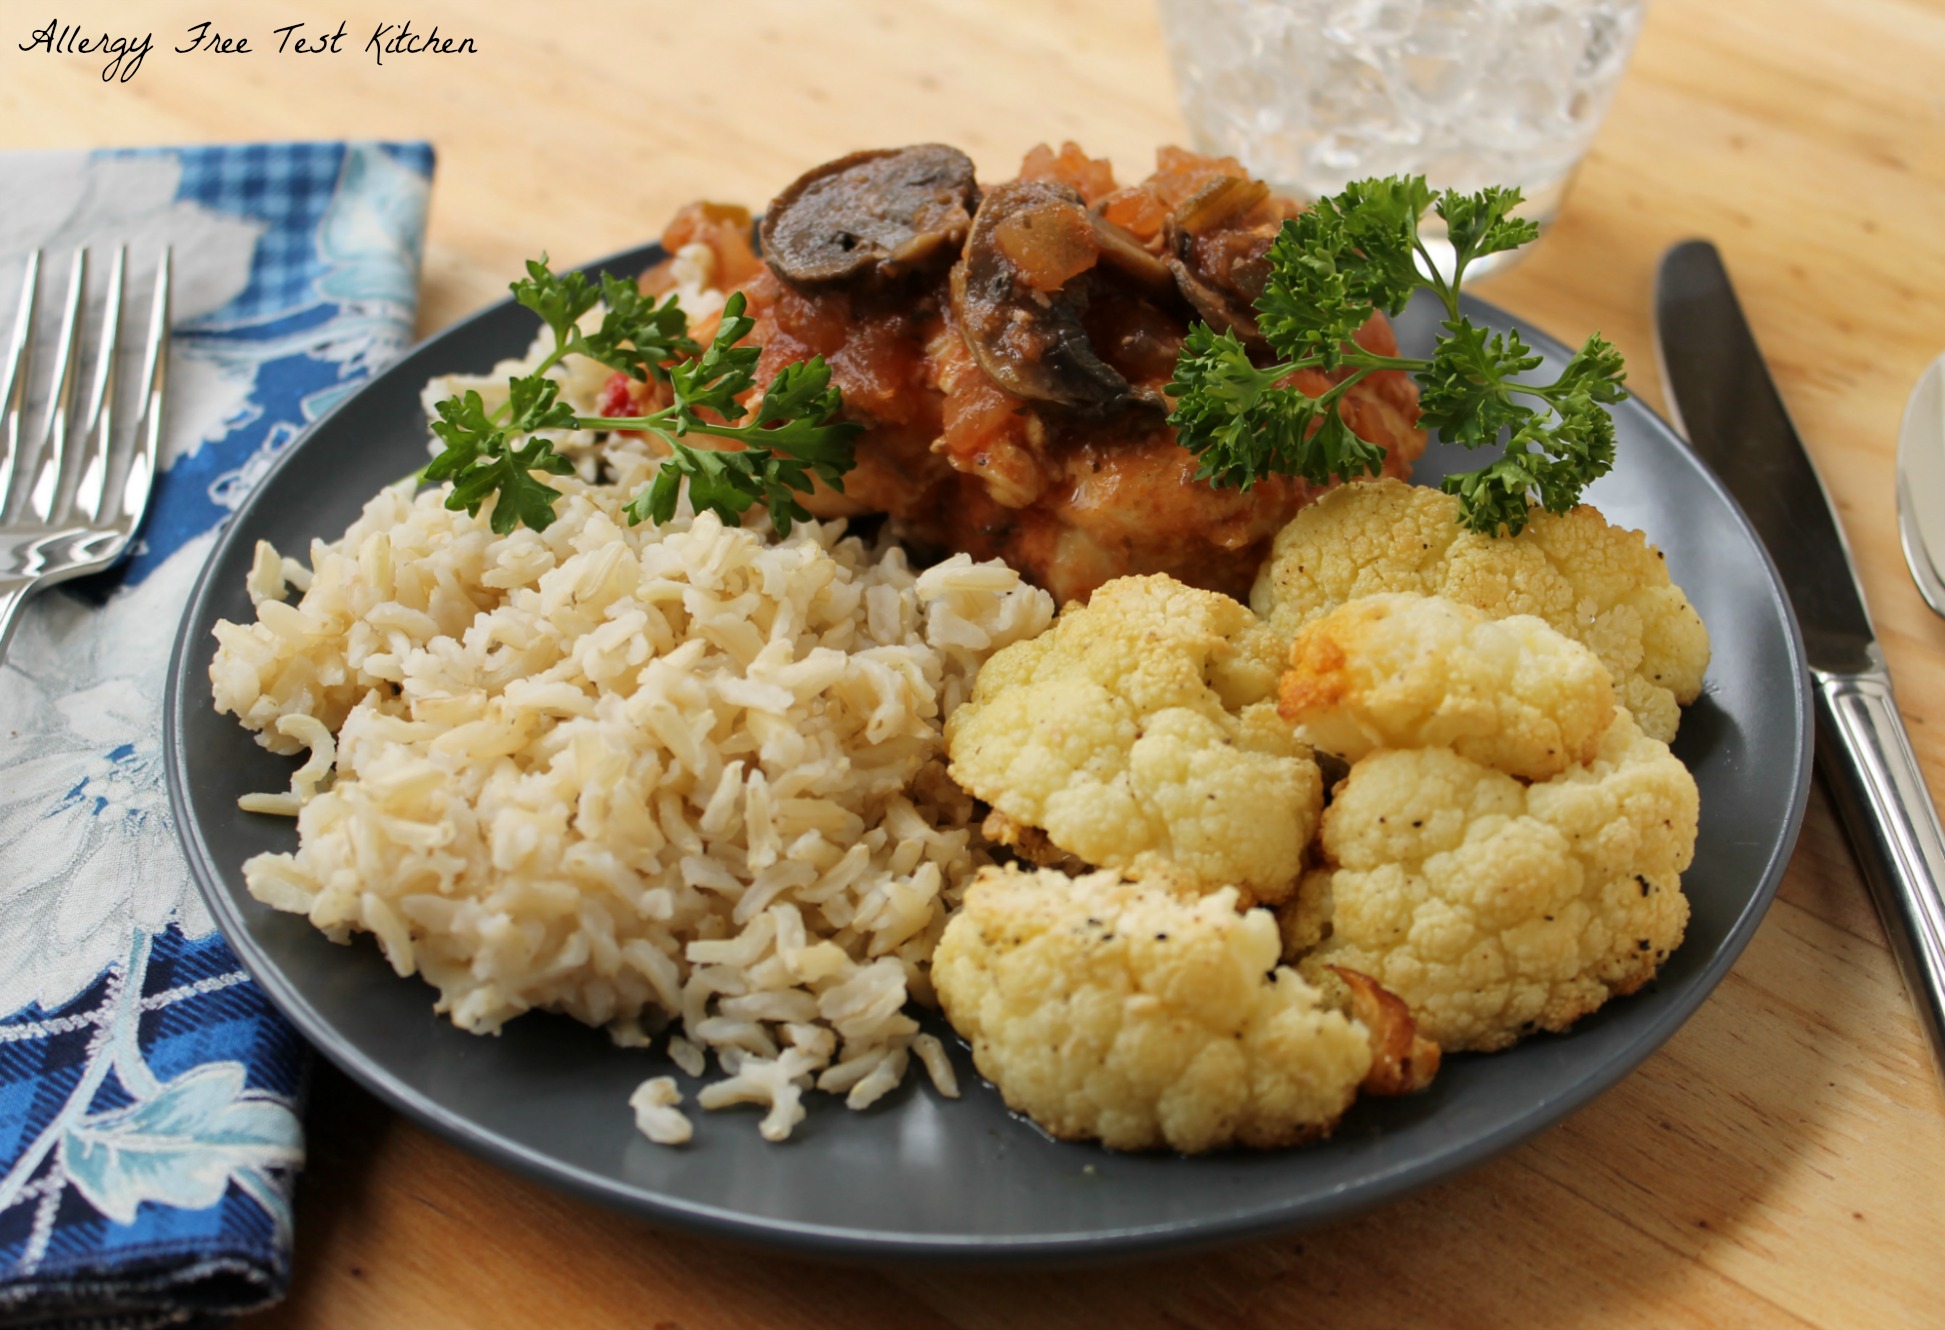 Mushroom Chicken and Rice - A Crockpot Meal - LIVING FREE HEALTH AND LIFE